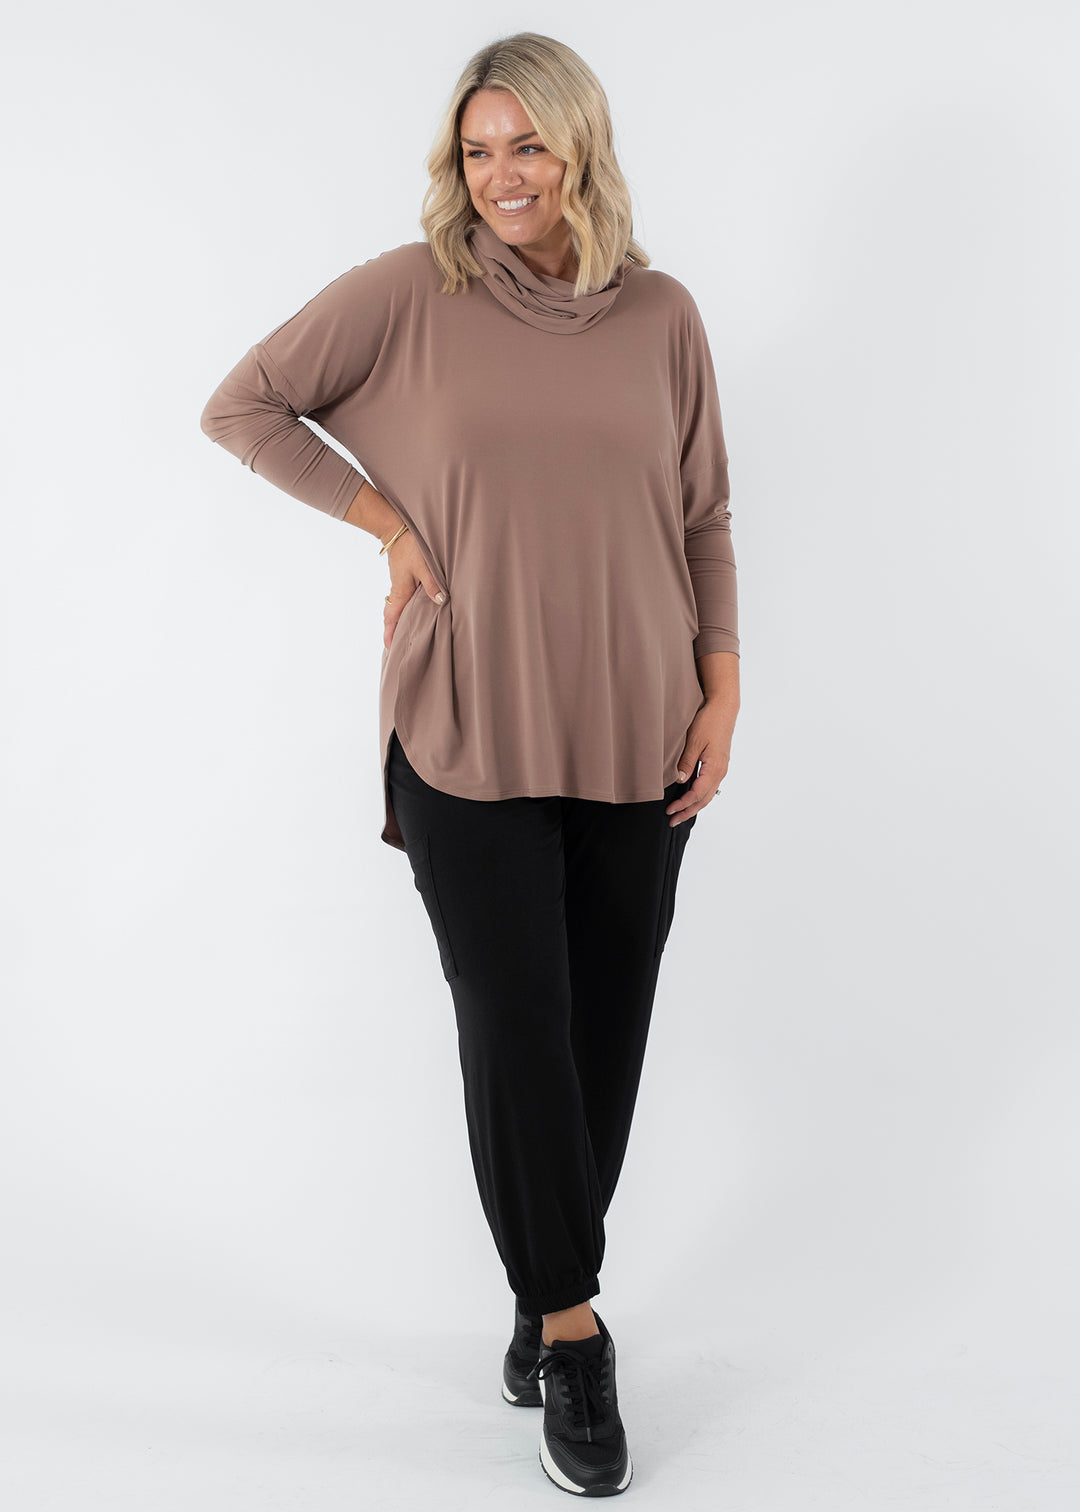 Solo tunic with snood in Coffee